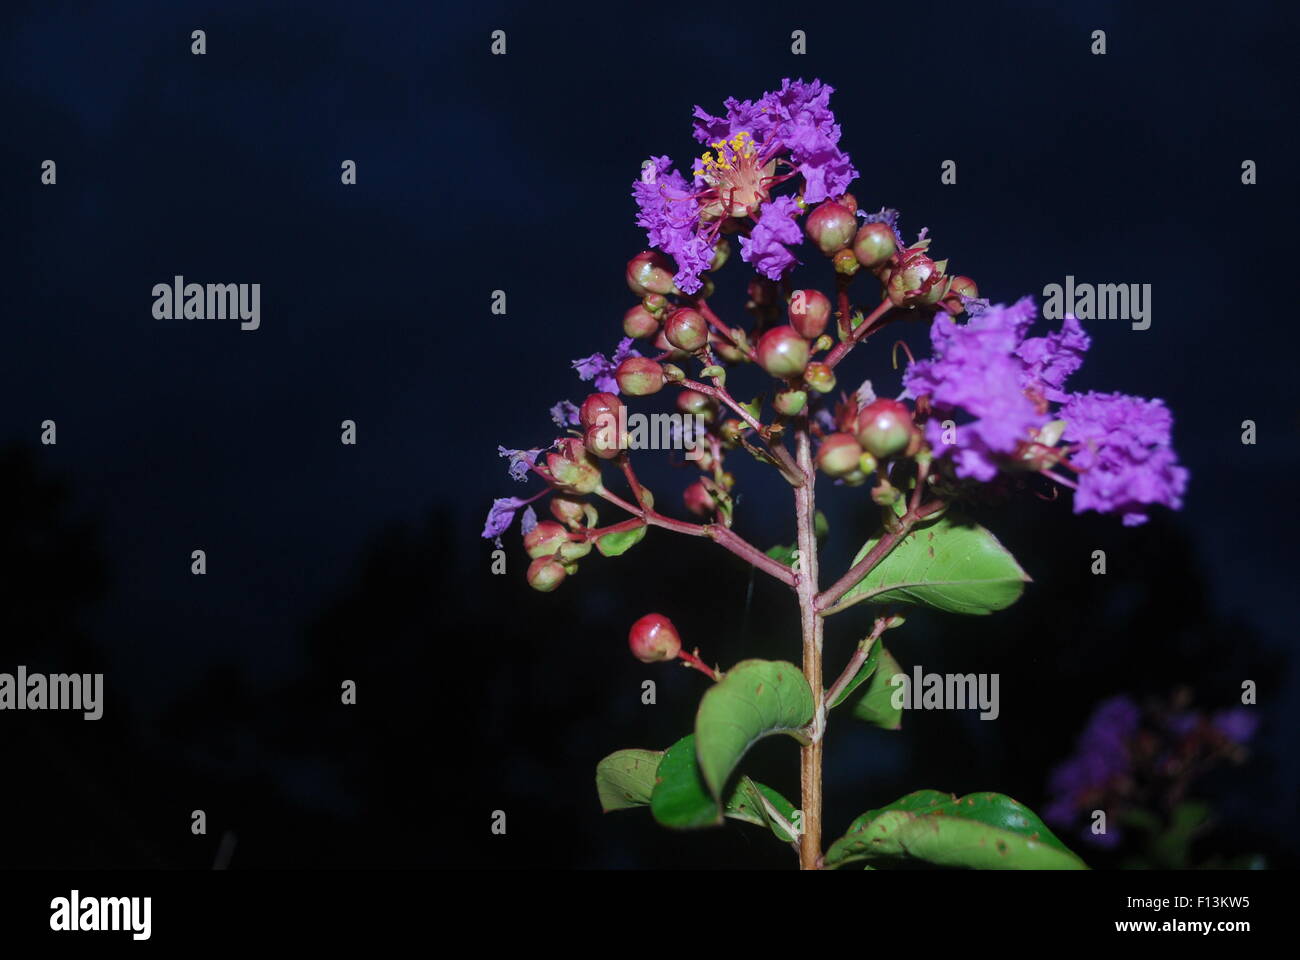 Purple flower cluster against night sky background. Stock Photo